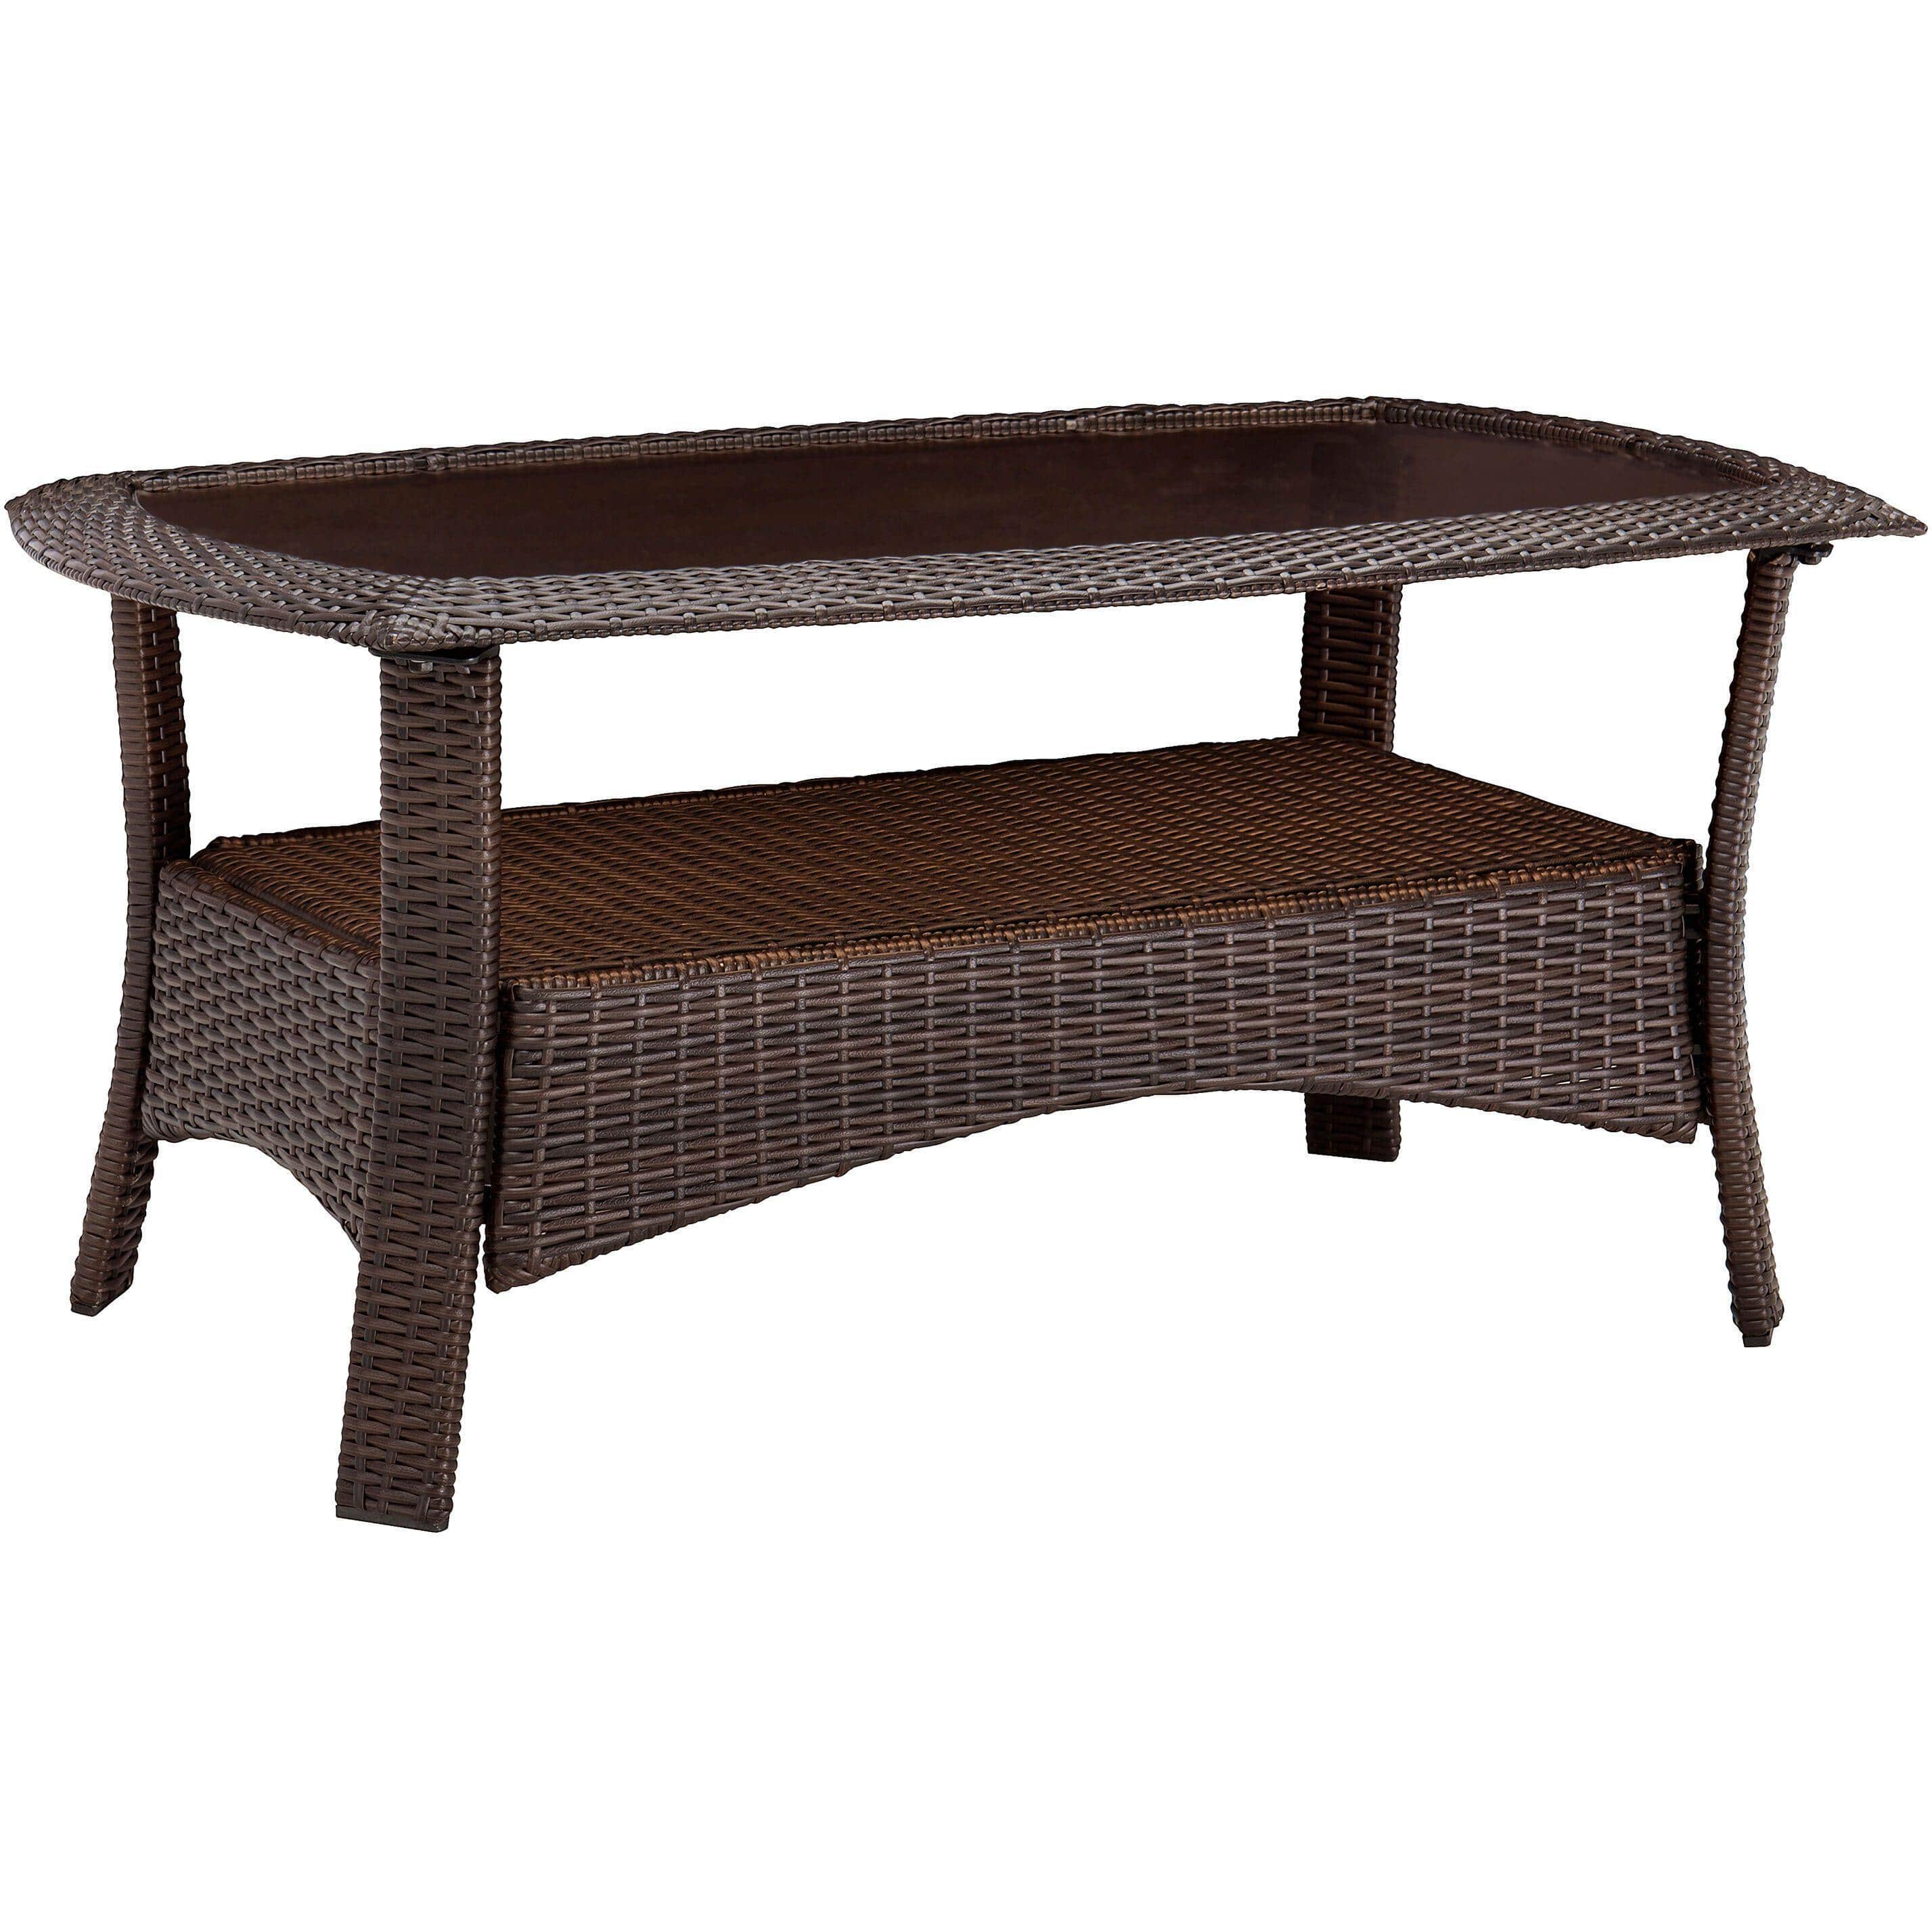 Hanover Accessories Hanover - Strathmere 25-In. x 41-In. Woven Patio Coffee Table with Tempered Glass Tabletop